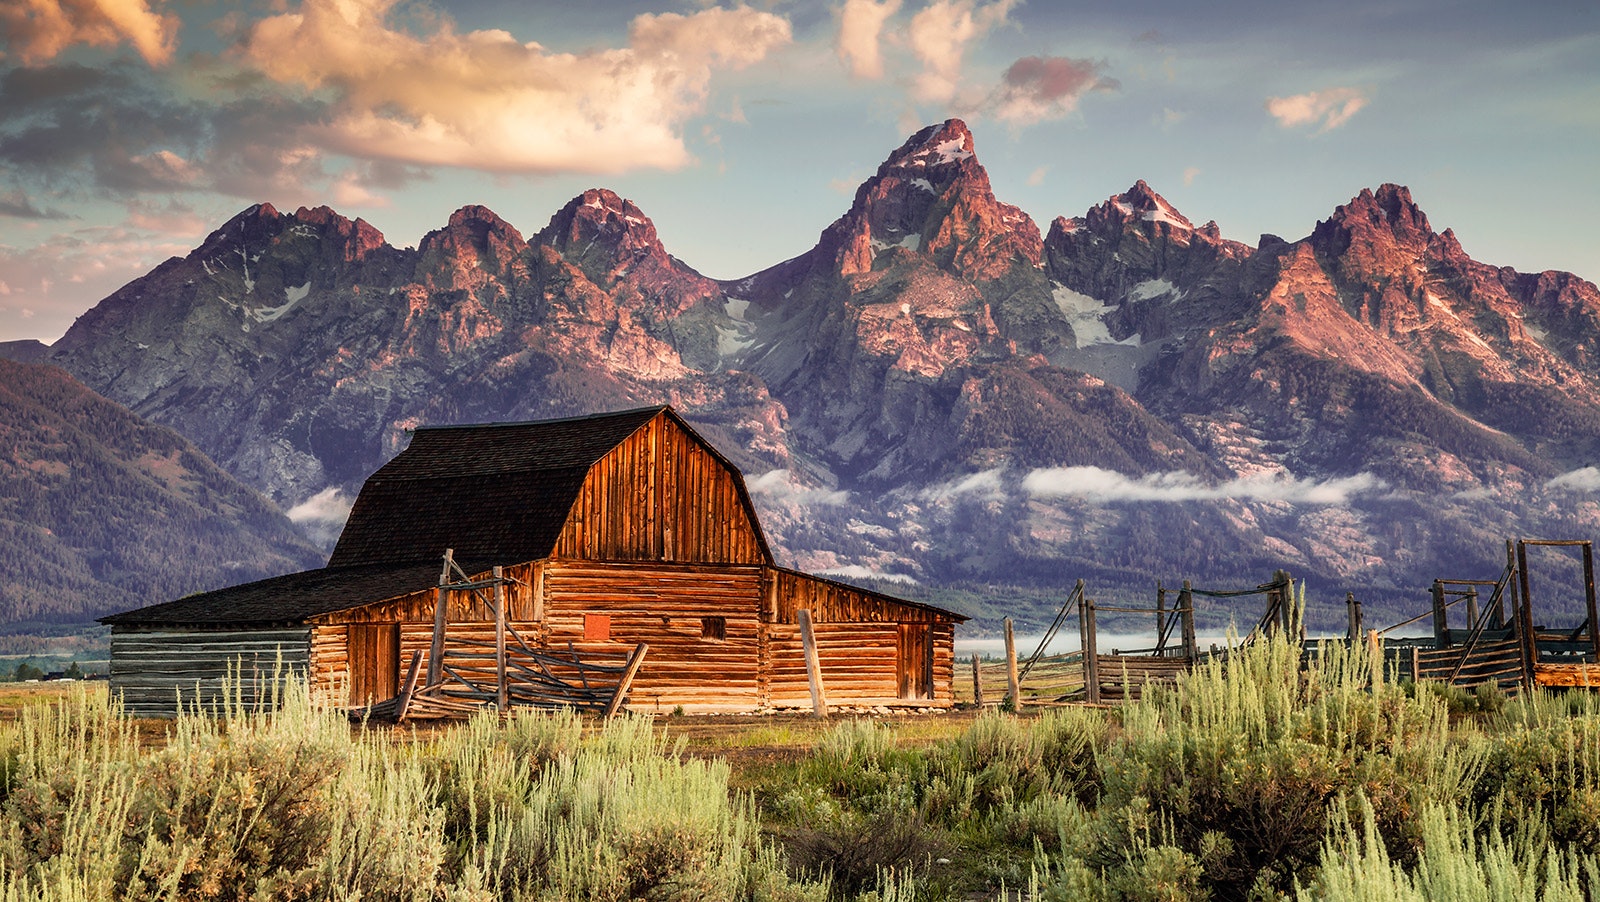 The John Moulton Barn on Mormon Row in Grand Teton National Park is almost as famous as the TA Moulton Barn, and photographed nearly as much.